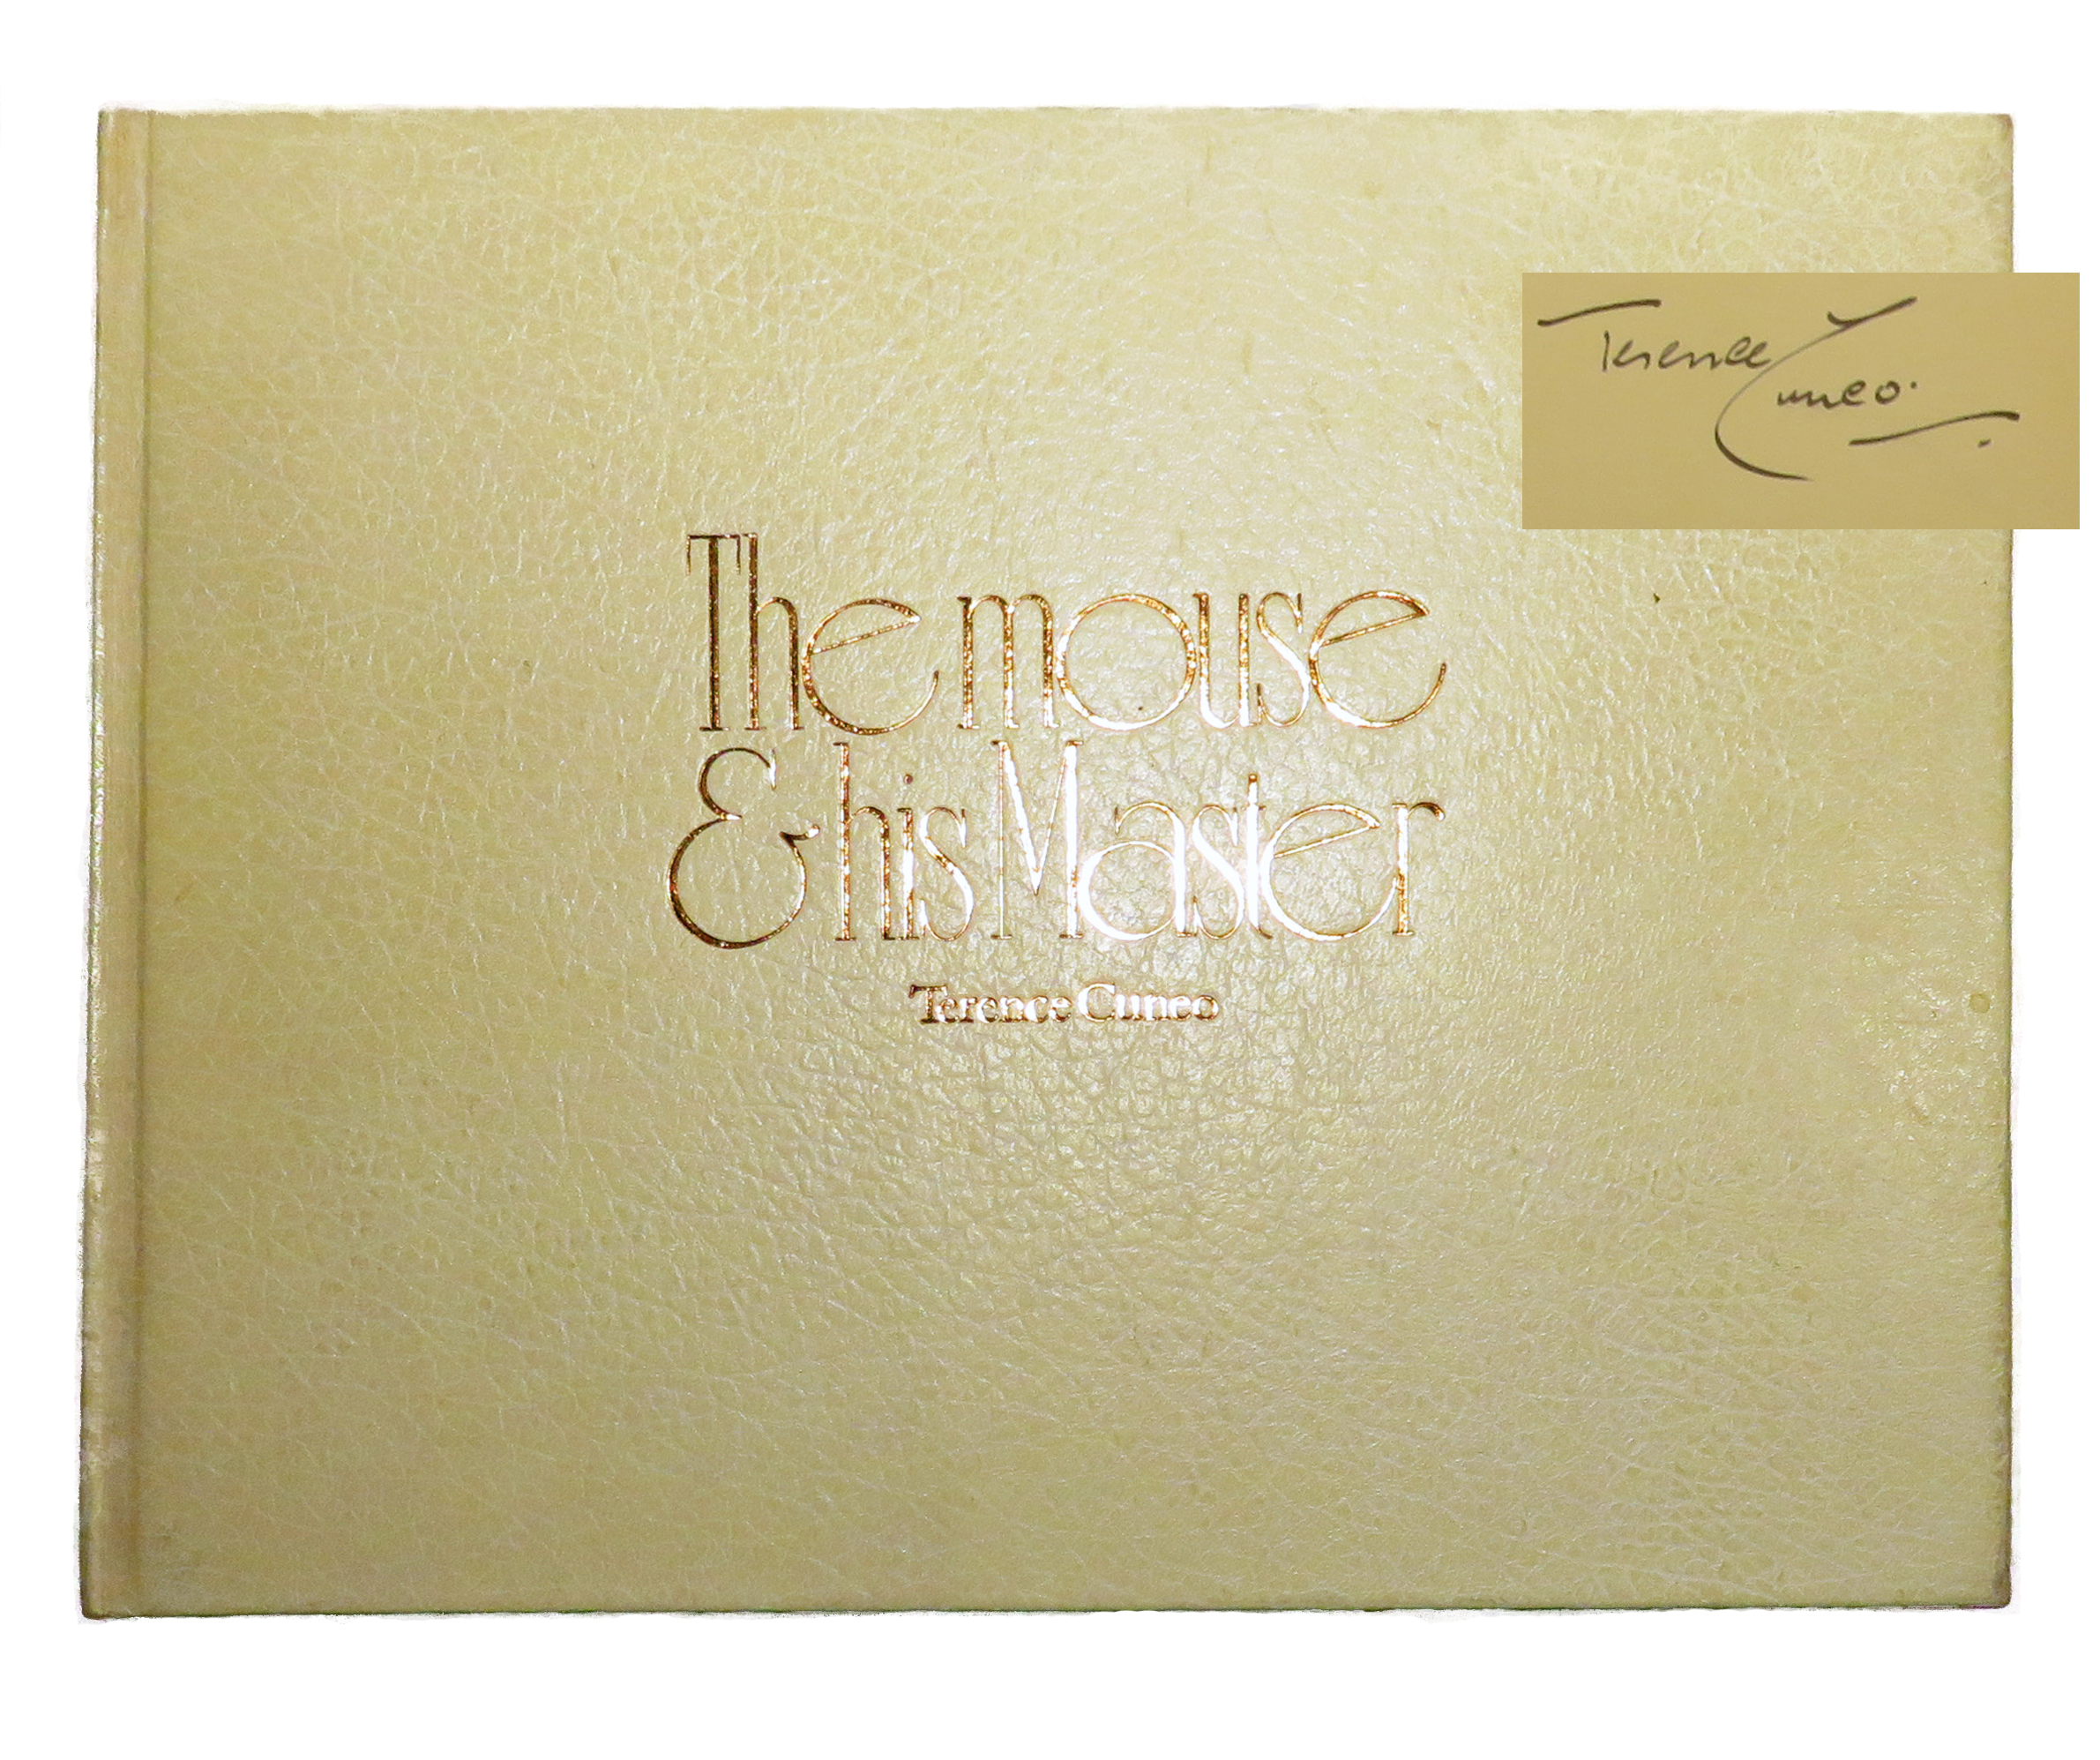 The Mouse & His Master. The Life and Works of Terence Cuneo. Signed by Cuneo.